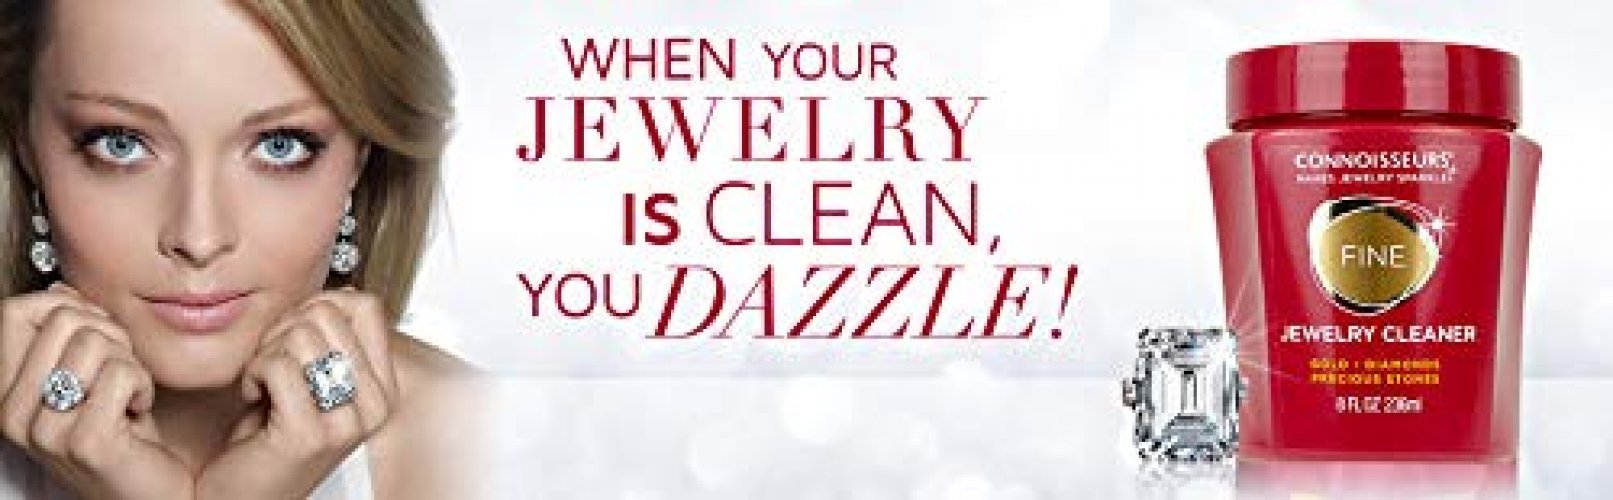 Connoisseurs Fine Jewelry Cleaner